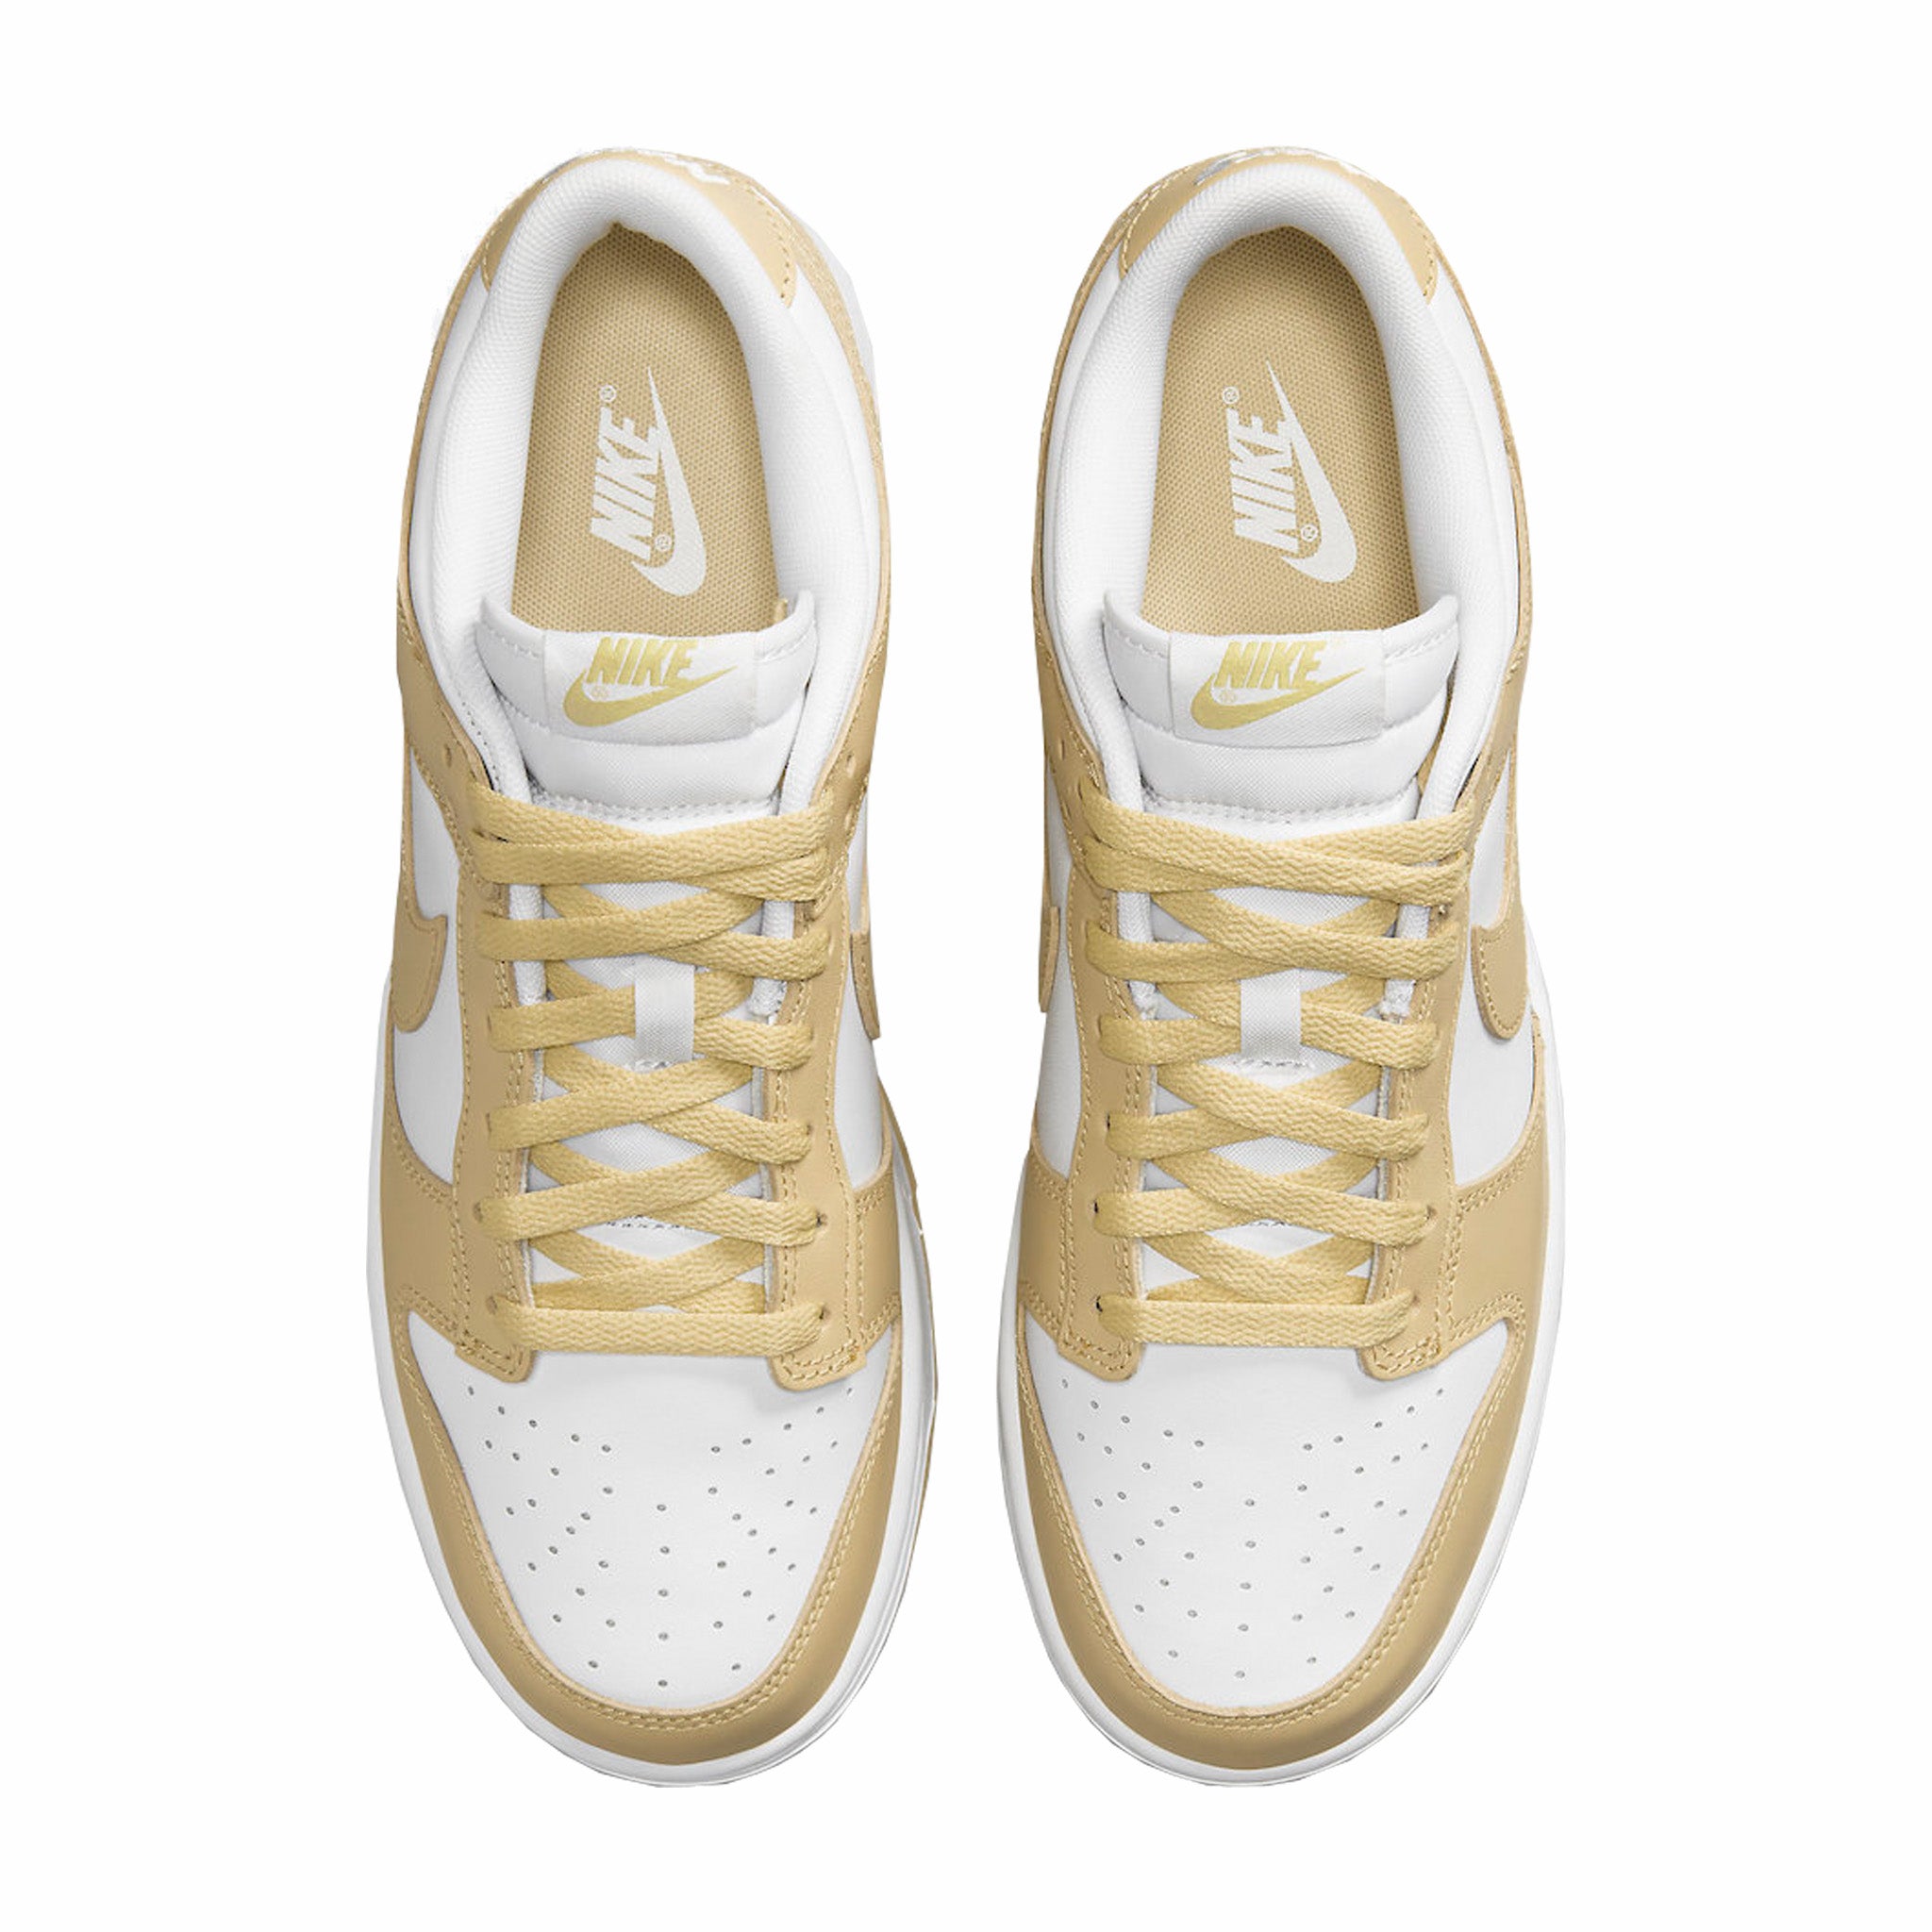 Nike Dunk Low “Team Gold” (White/Team Gold-Wolf Grey-White) - August Shop